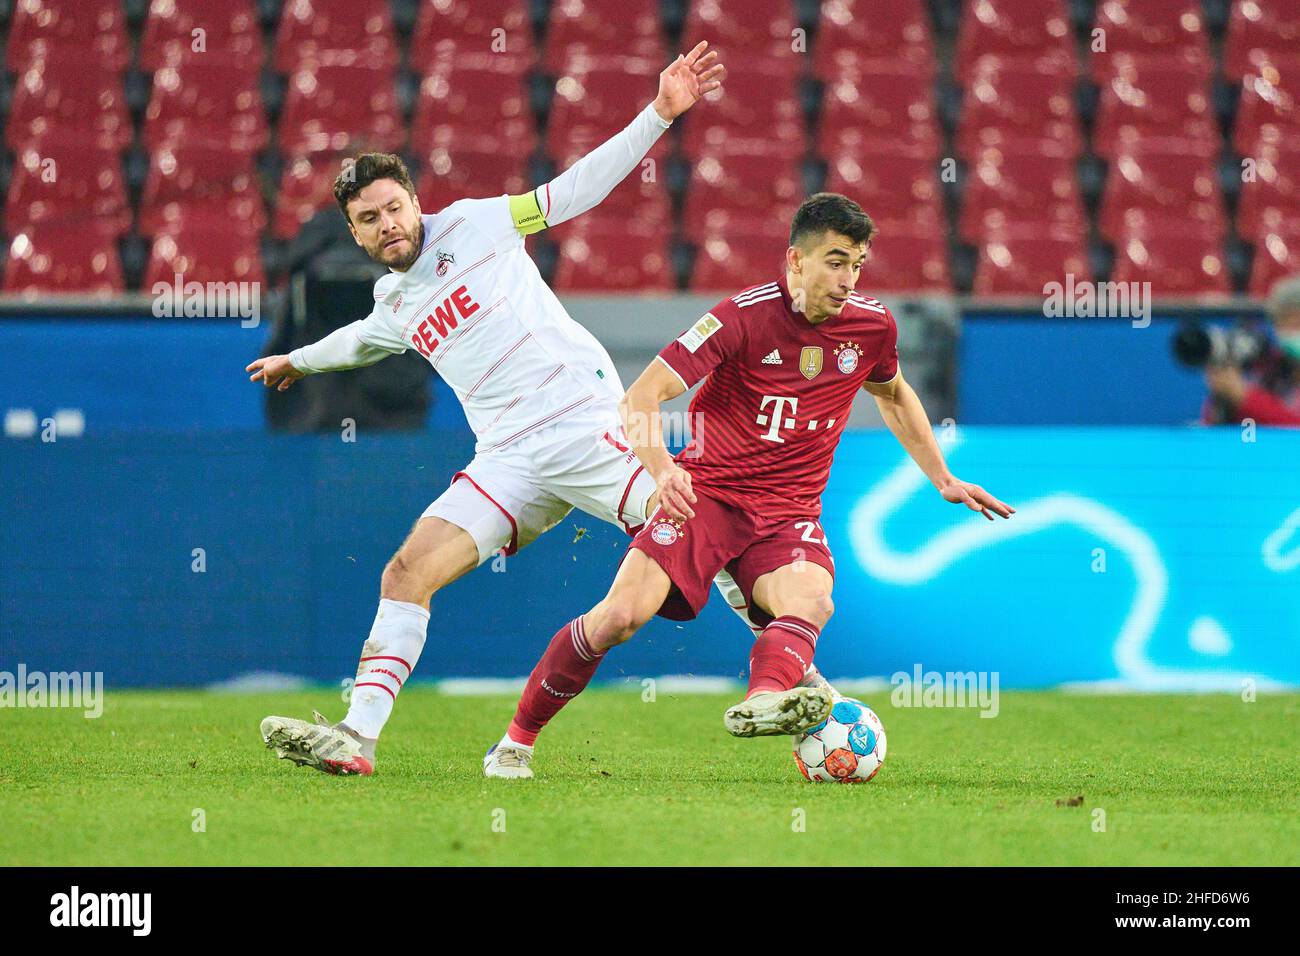 Marc ROCA, FCB 22  compete for the ball, tackling, duel, header, zweikampf, action, fight against Jonas HECTOR, 1.FCK 14  in the match 1.FC KÖLN - FC BAYERN MÜNCHEN 0-4 1.German Football League on Jan 15, 2022 in Cologne, Germany  Season 2021/2022, matchday 19, 1.Bundesliga, 19.Spieltag,  © Peter Schatz / Alamy Live News    - DFL REGULATIONS PROHIBIT ANY USE OF PHOTOGRAPHS as IMAGE SEQUENCES and/or QUASI-VIDEO - Stock Photo